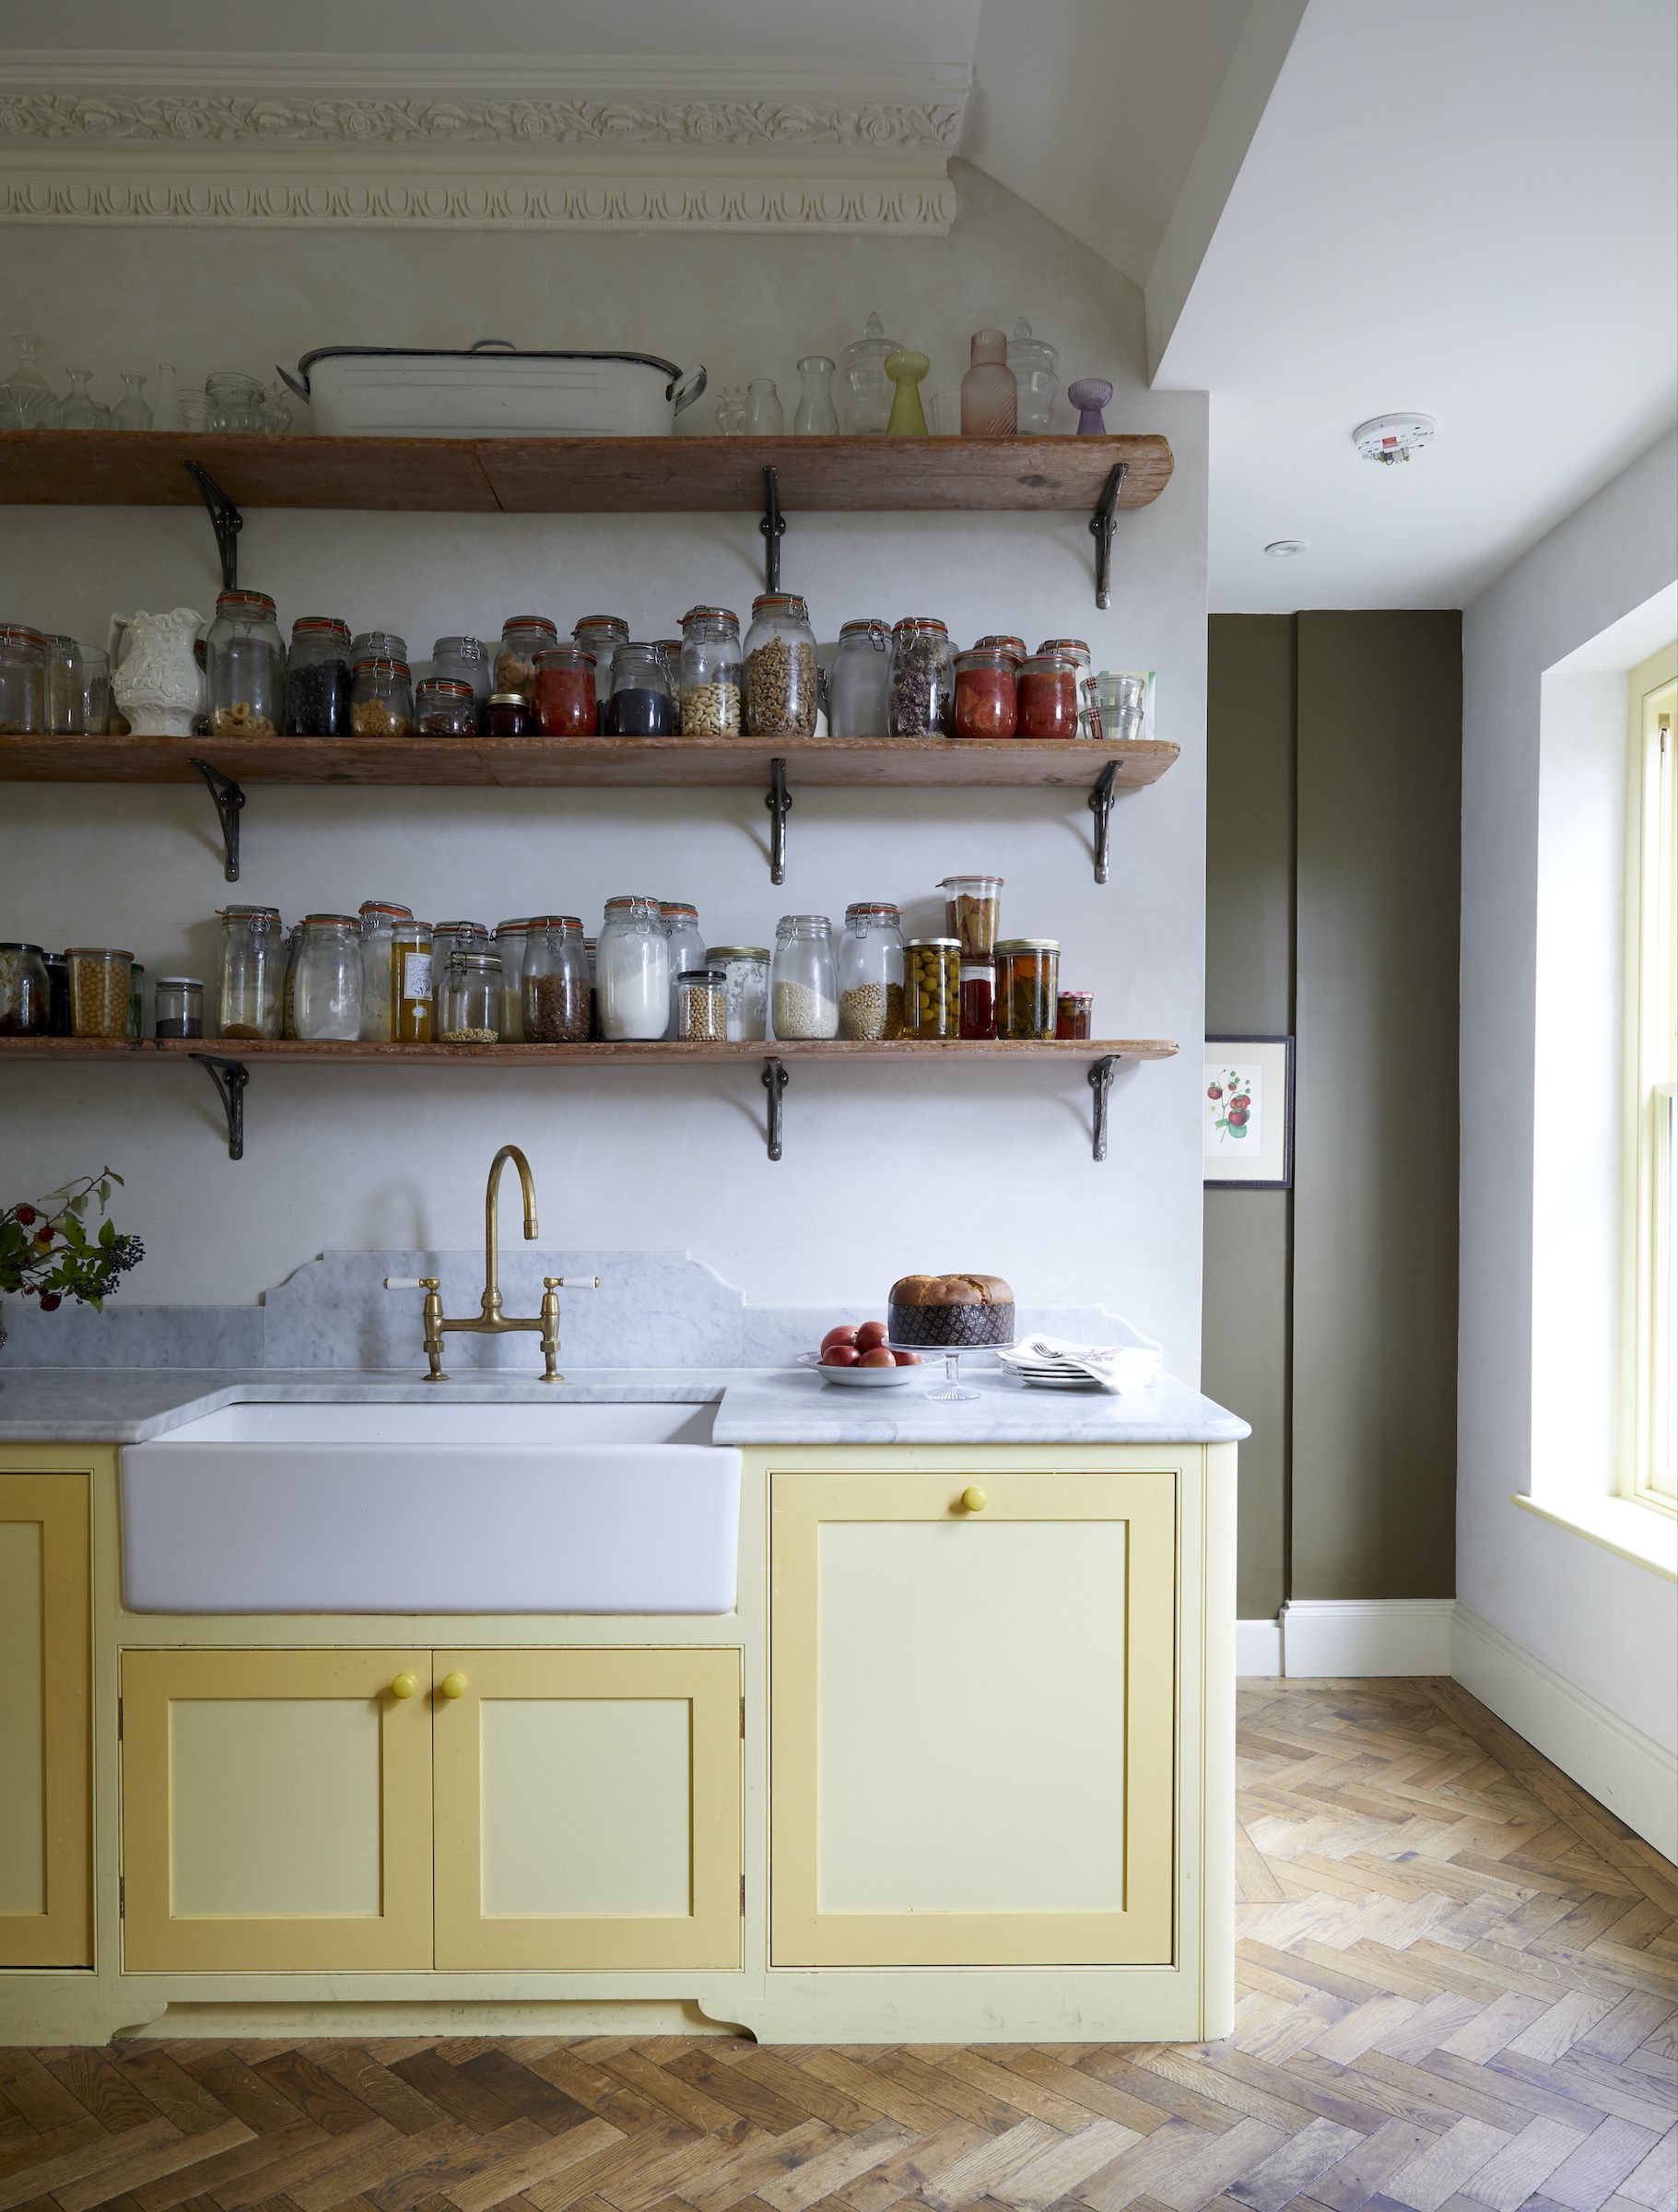 Kitchens without wall cabinets: 7 reasons to ditch cabinets